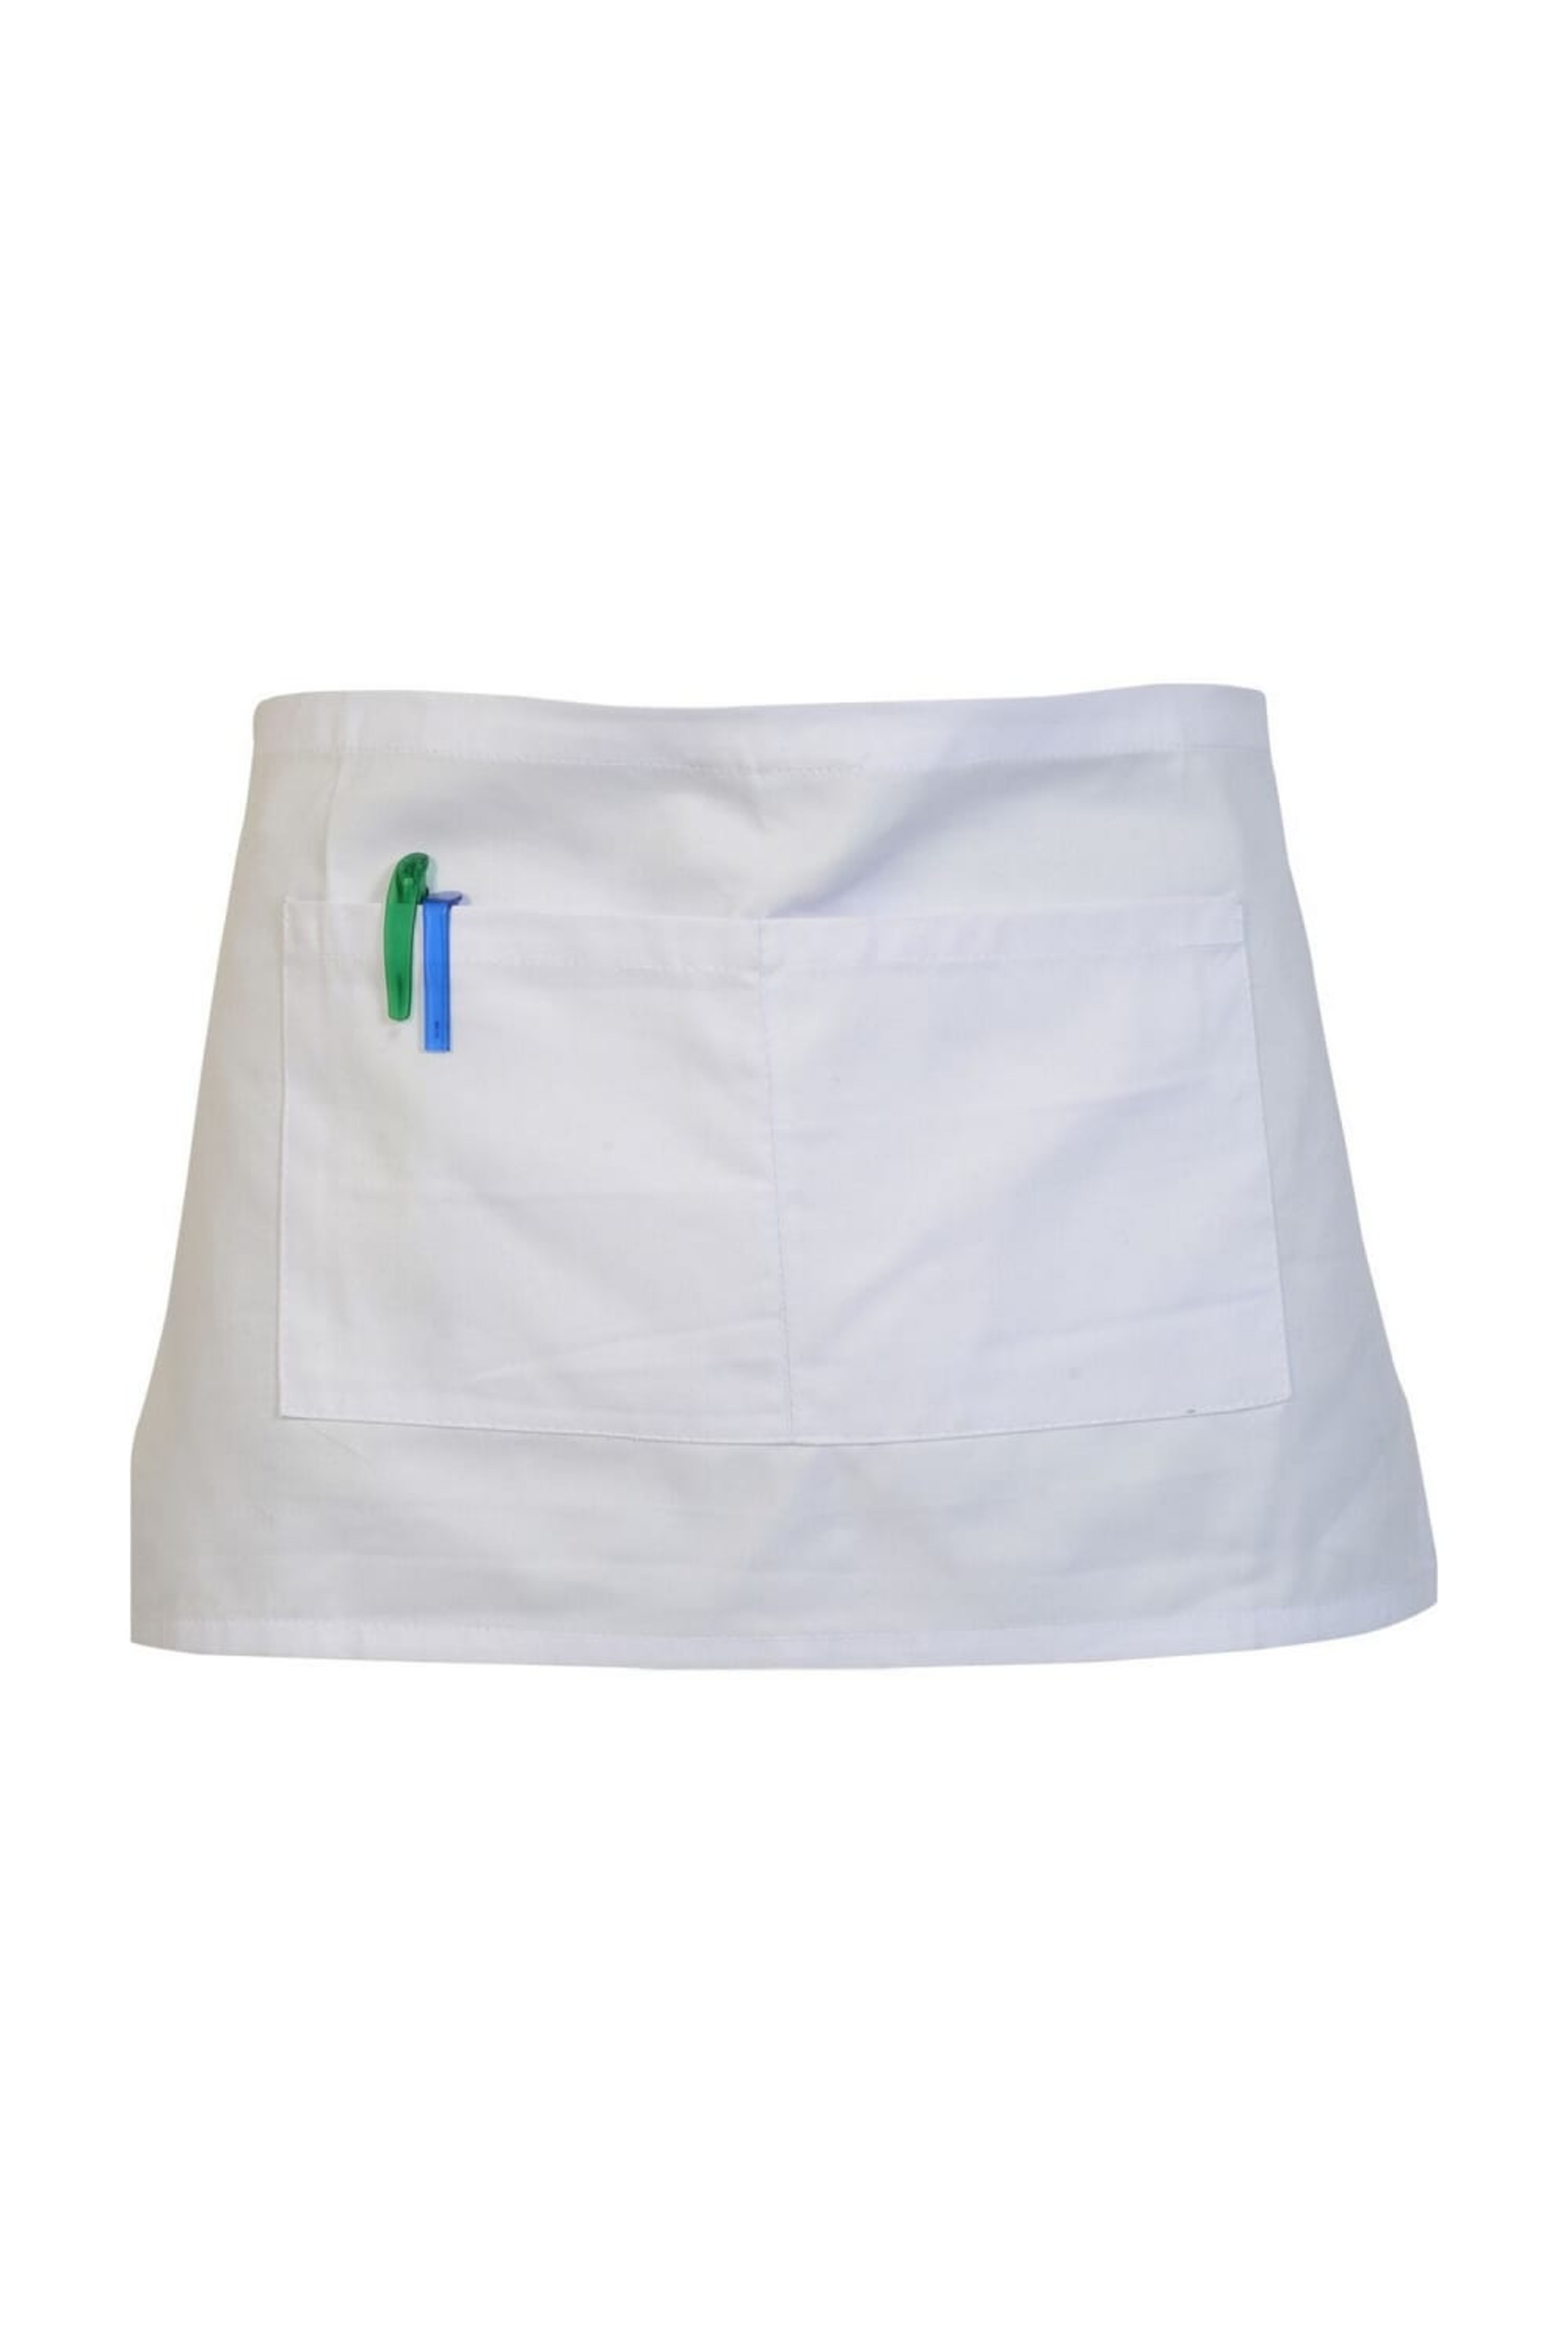 ABSOLUTE APPAREL ABSOLUTE APPAREL ADULTS WORKWEAR WAIST APRON WITH POCKET IN WHITE